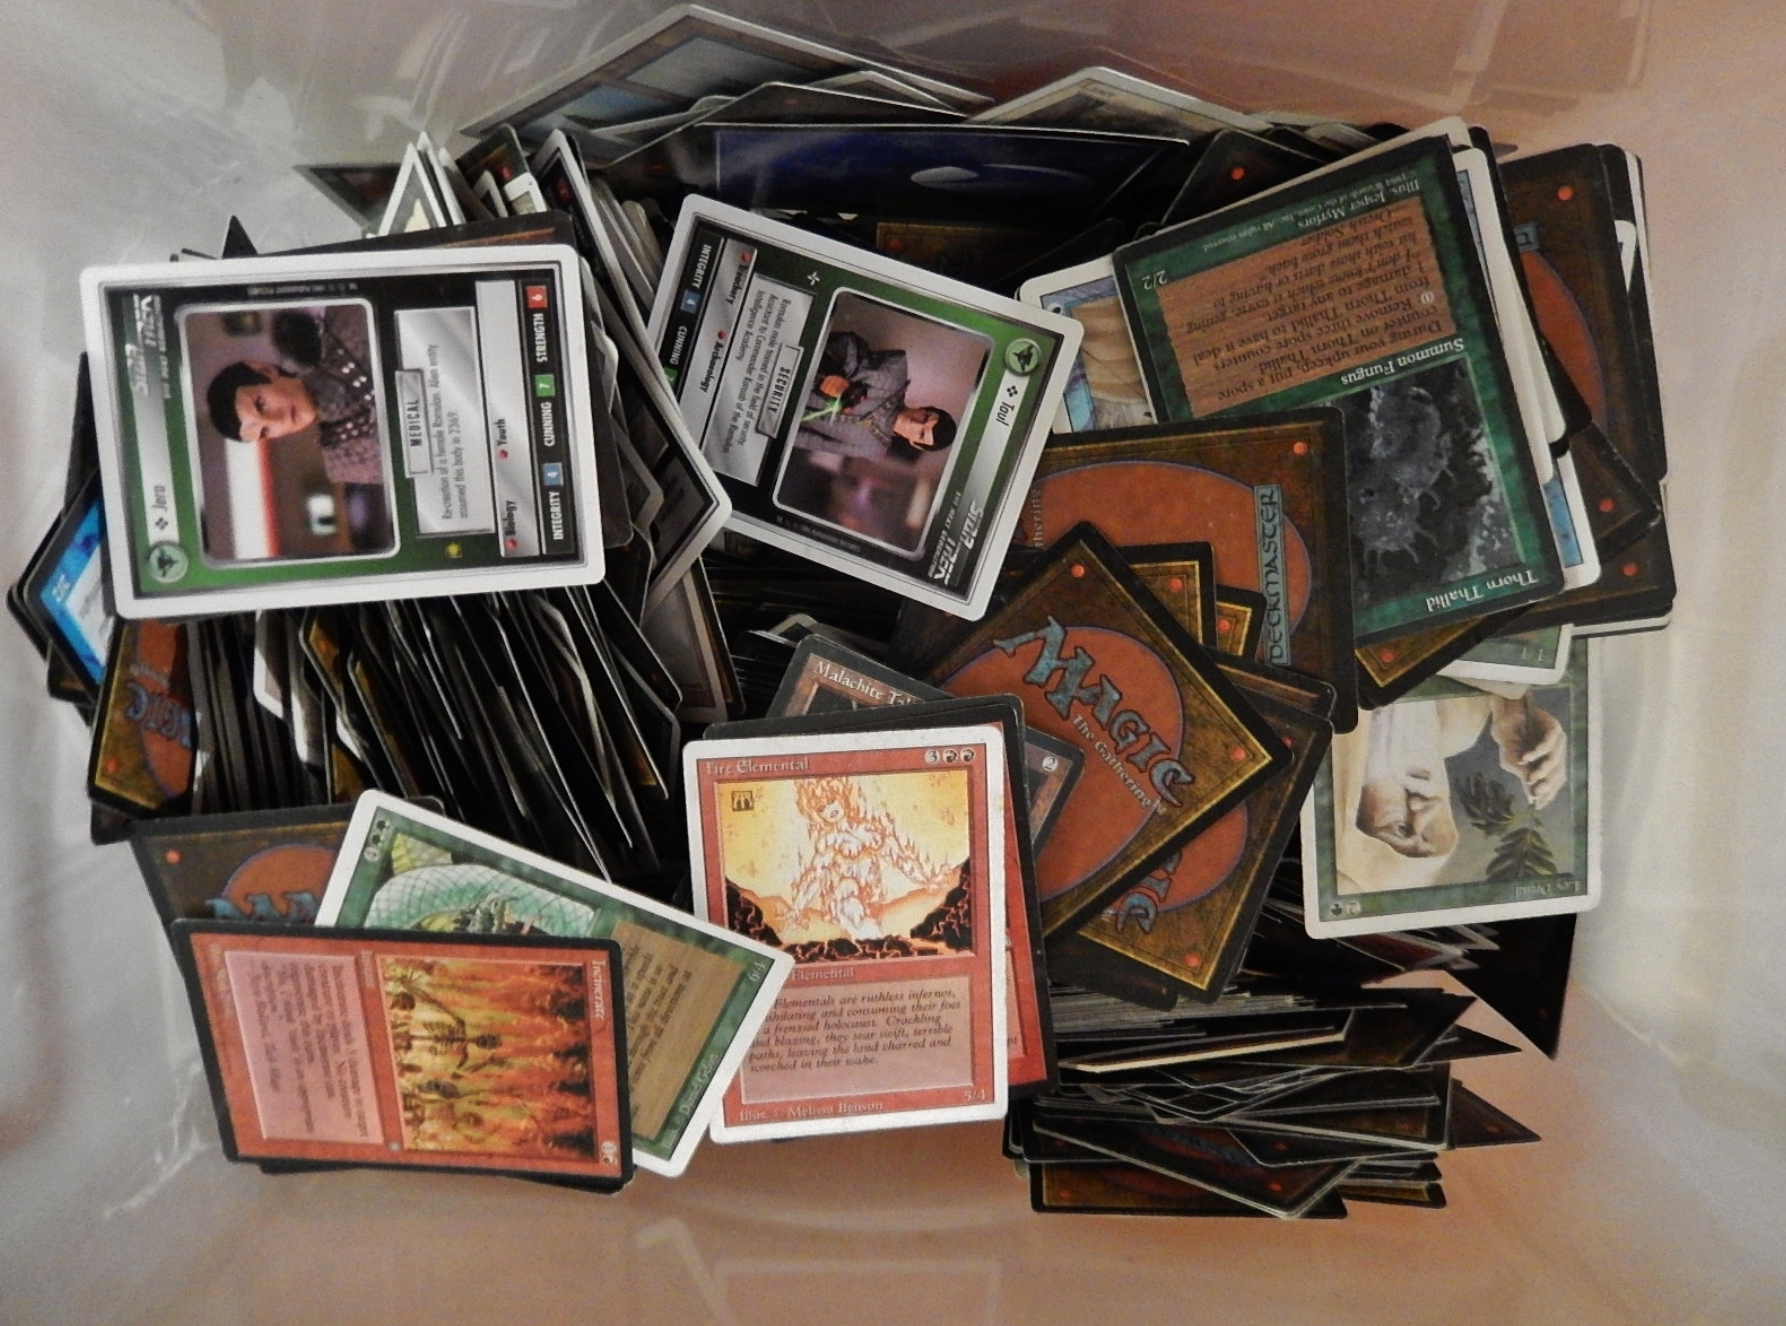 A box of unsorted magic cards © CC BY-SA 2.0 [https://www.flickr.com/photos/mikecogh/15225553495](https://www.flickr.com/photos/mikecogh/15225553495)